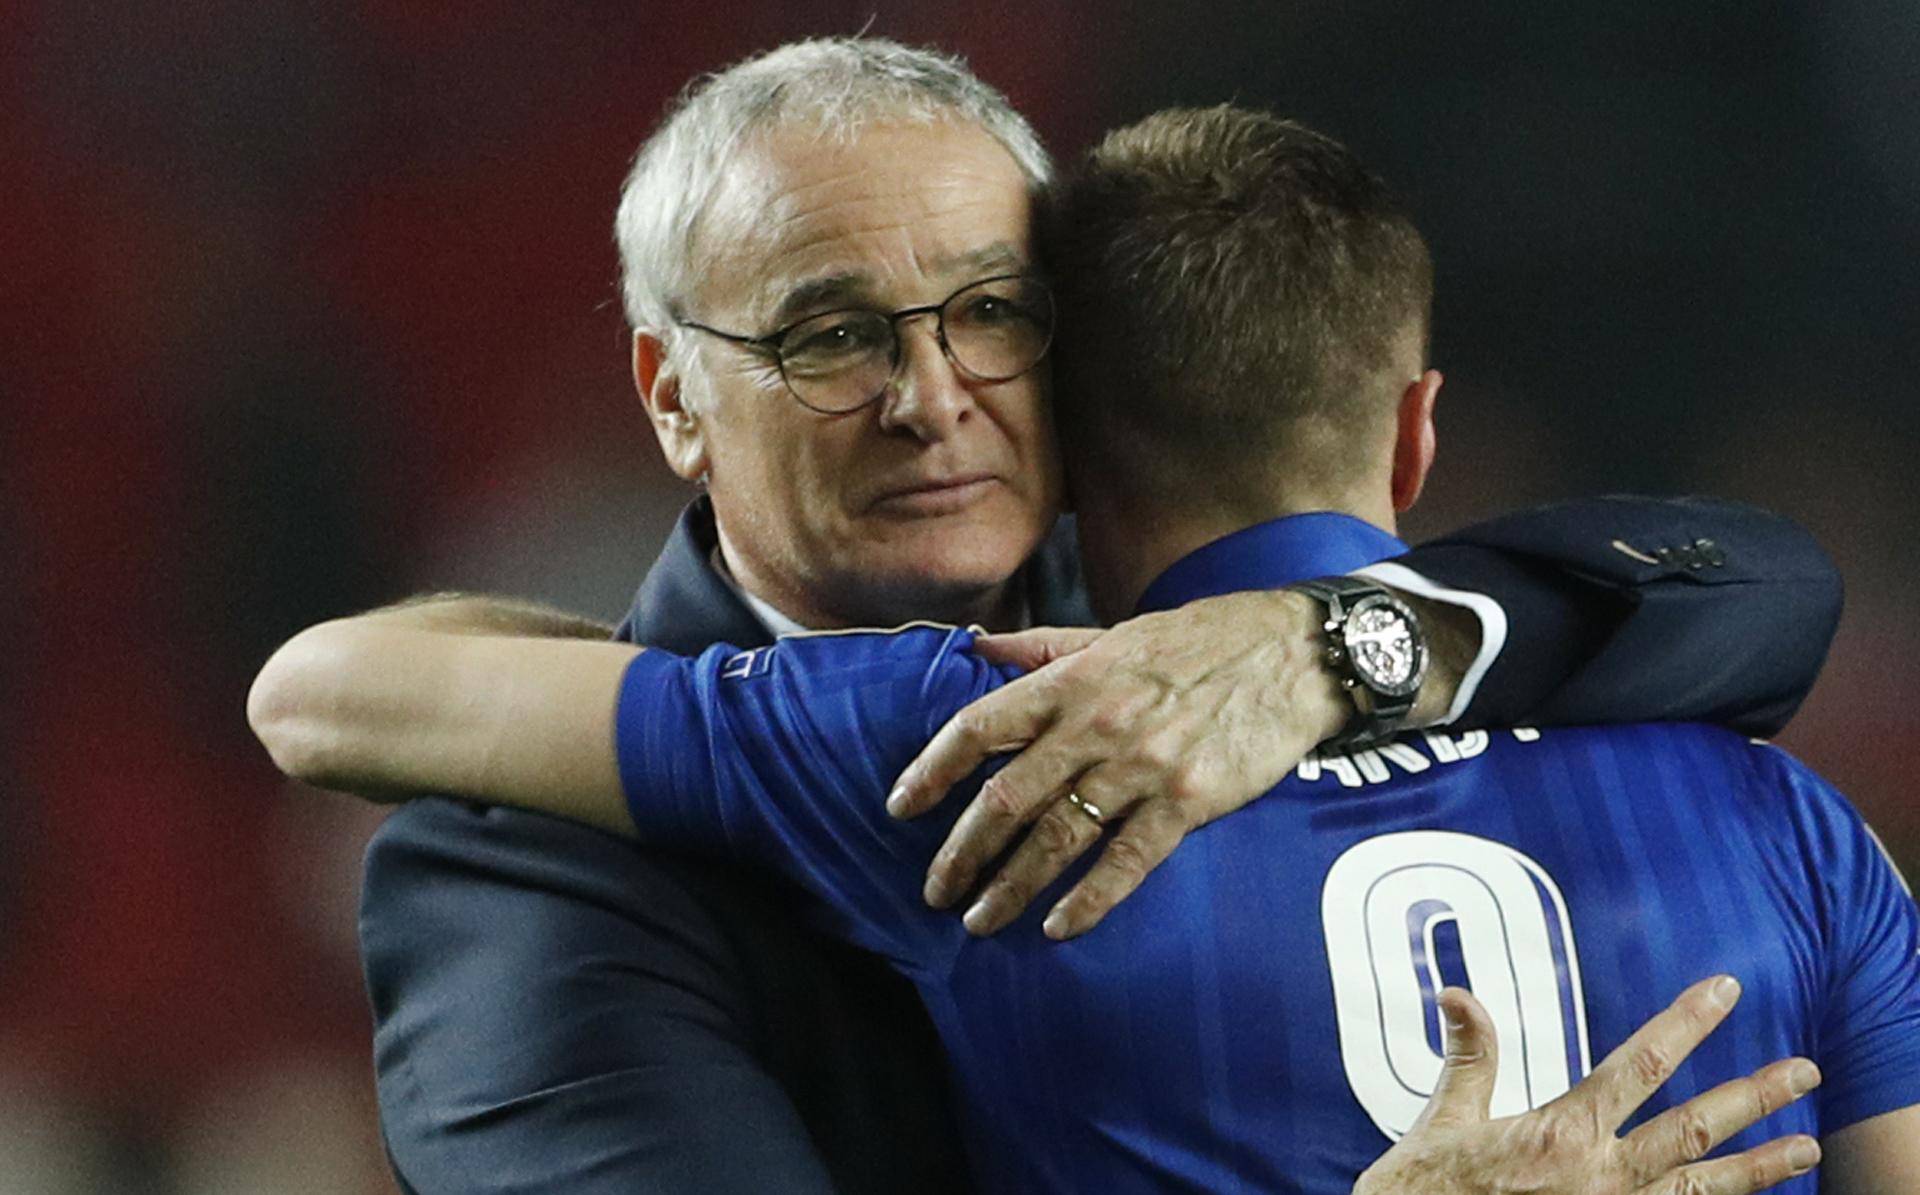 Leicester City's Jamie Vardy and Leicester City manager Claudio Ranieri after the match